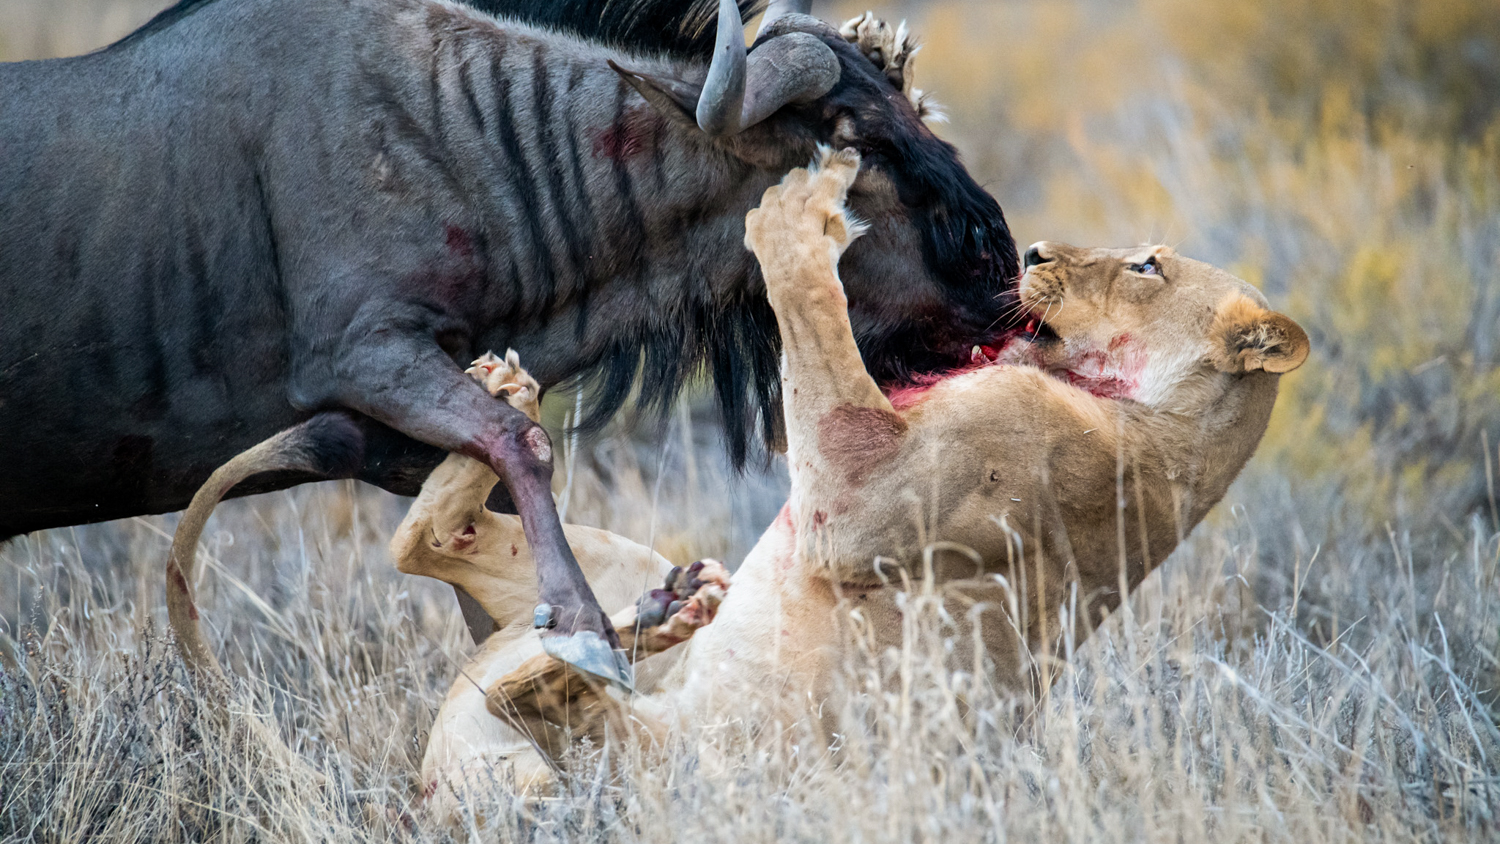 Lioness Catches Wildebeest by Its Face